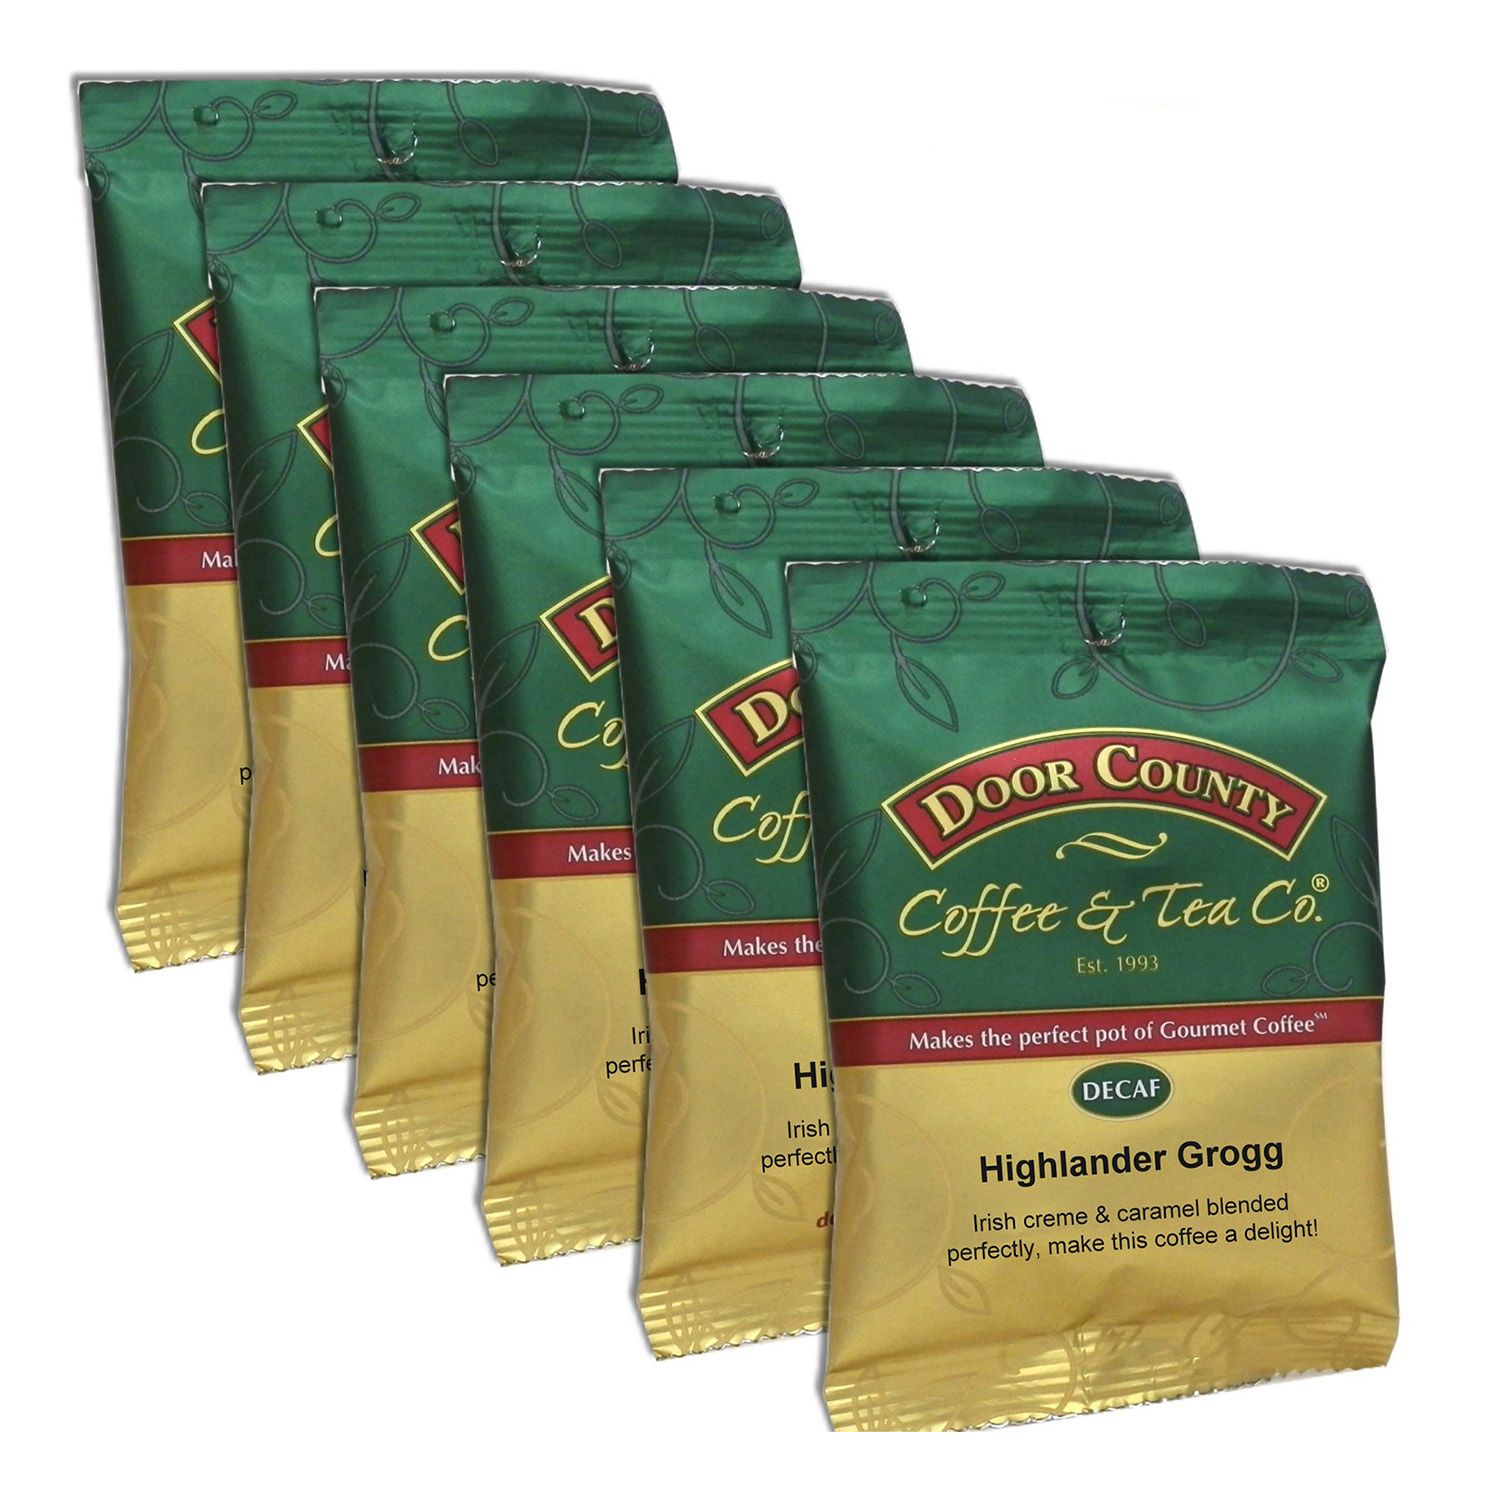 Image for Door County Coffee & Tea Co. Decaf Highlander Grogg Ground Coffee 6-pk. at Kohl's.